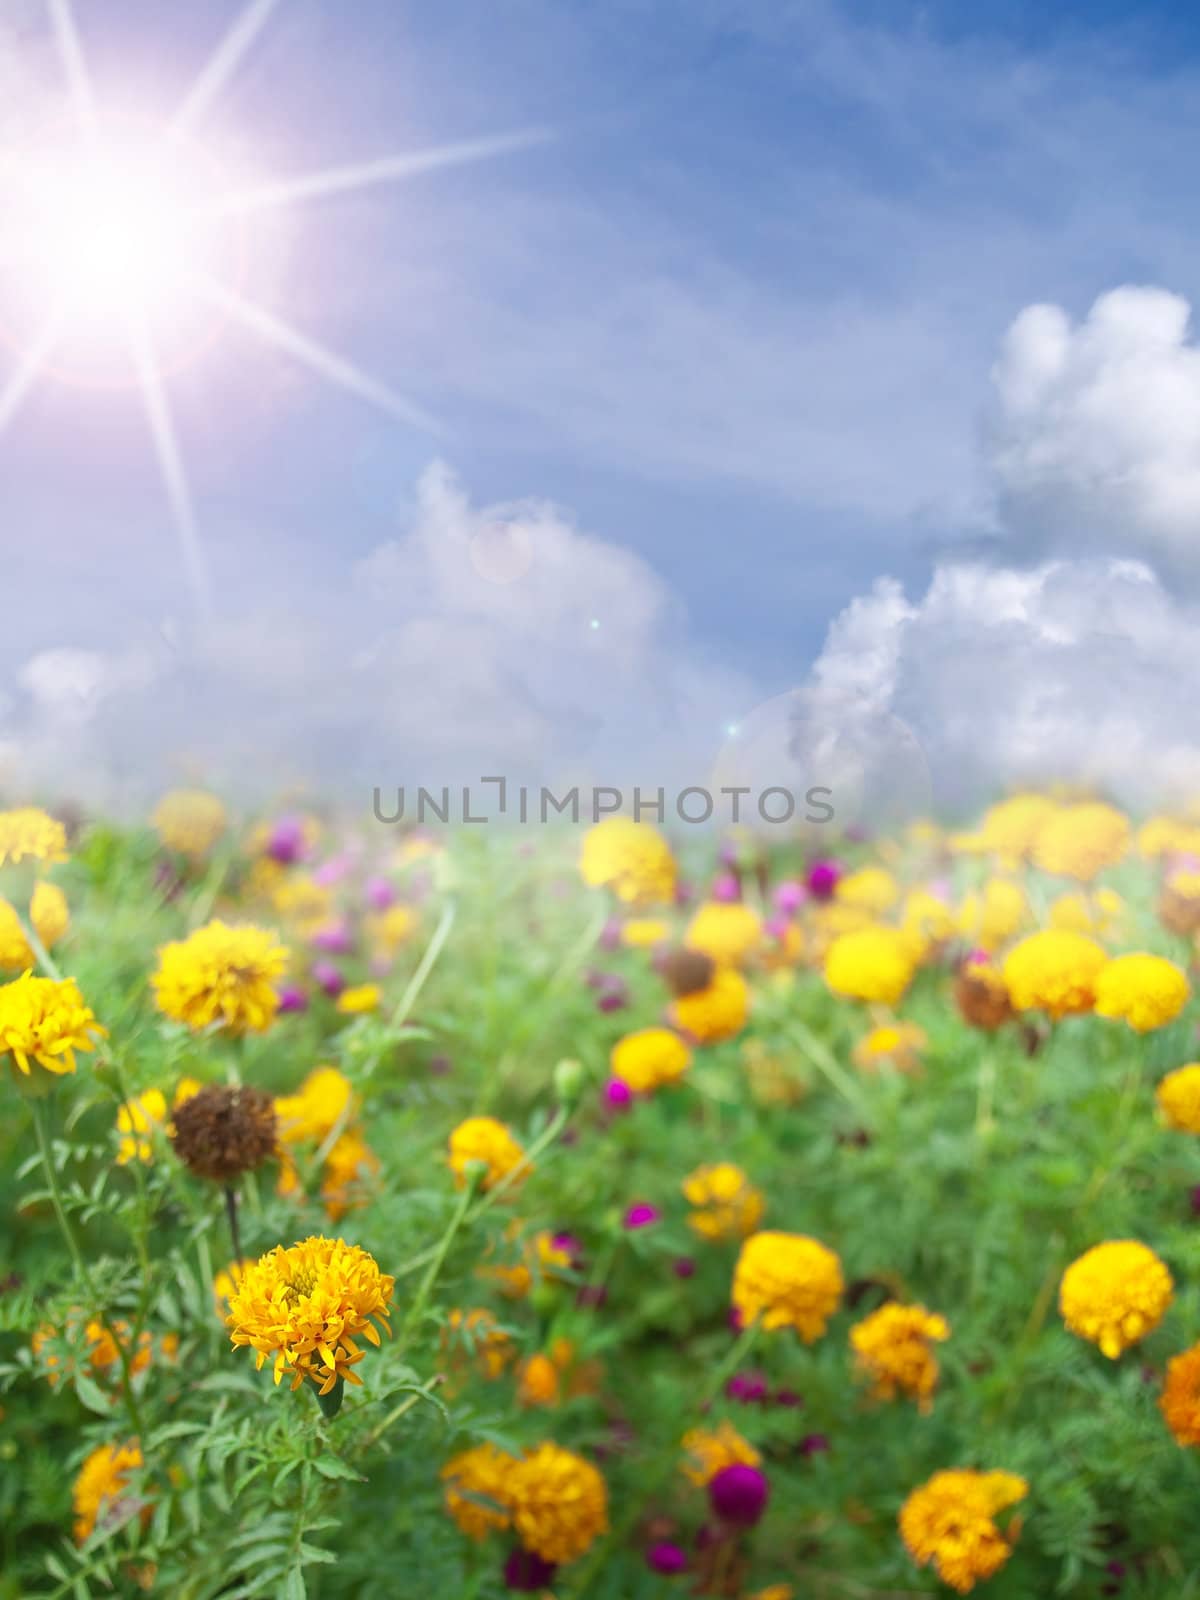 Marigold field with sky, sunlight and some Globe Amaranth(Bachelor's buttons)